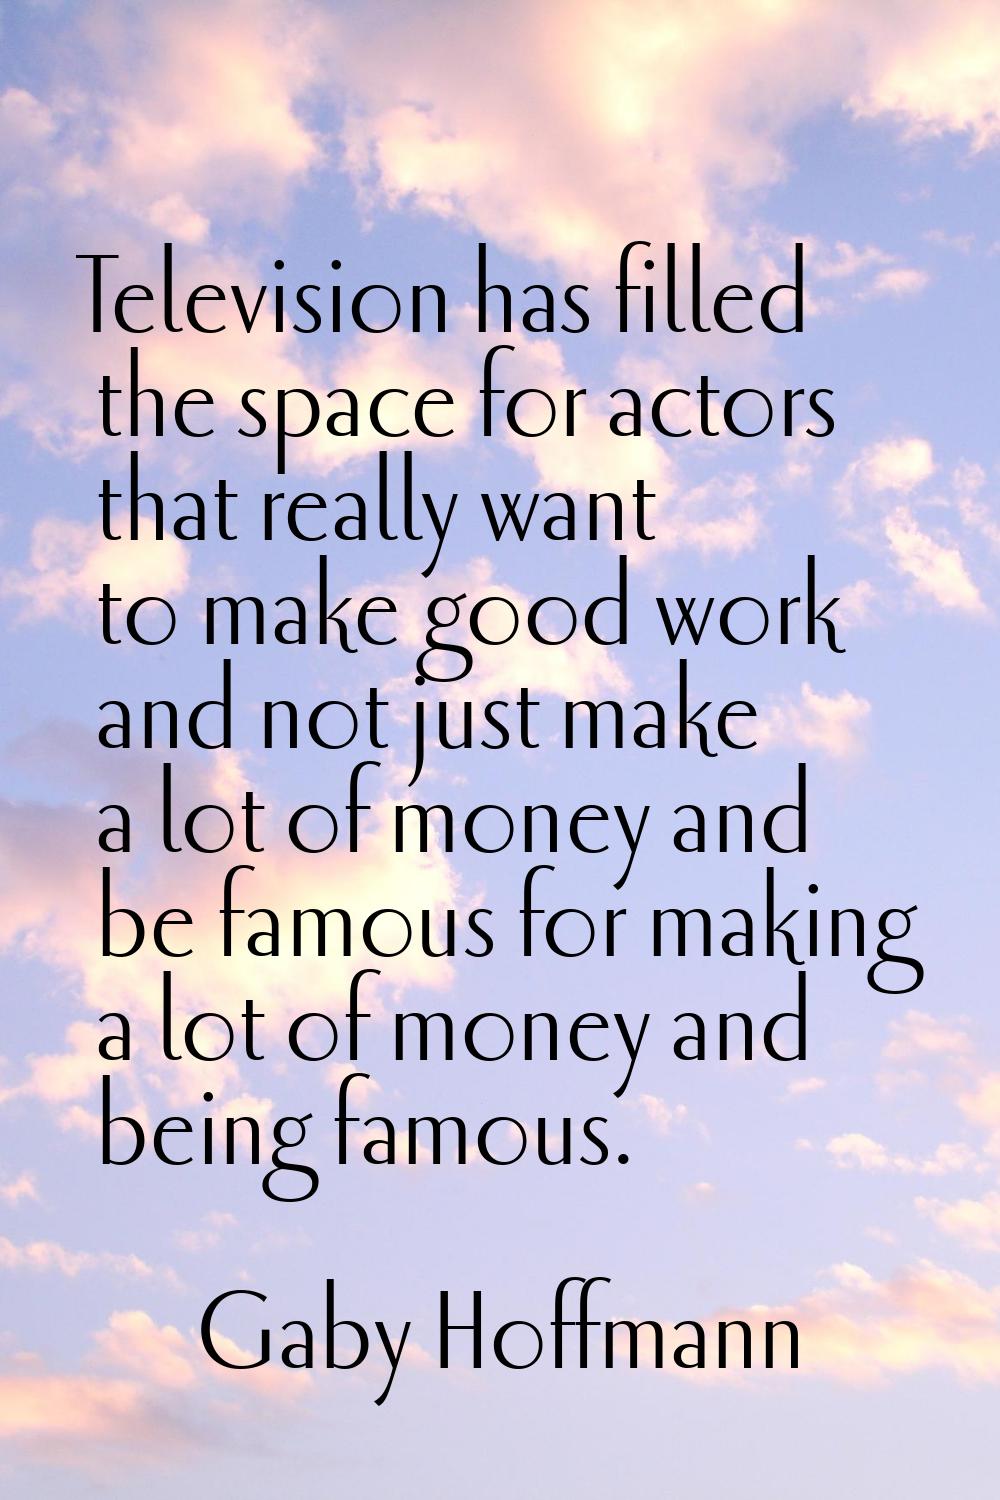 Television has filled the space for actors that really want to make good work and not just make a l